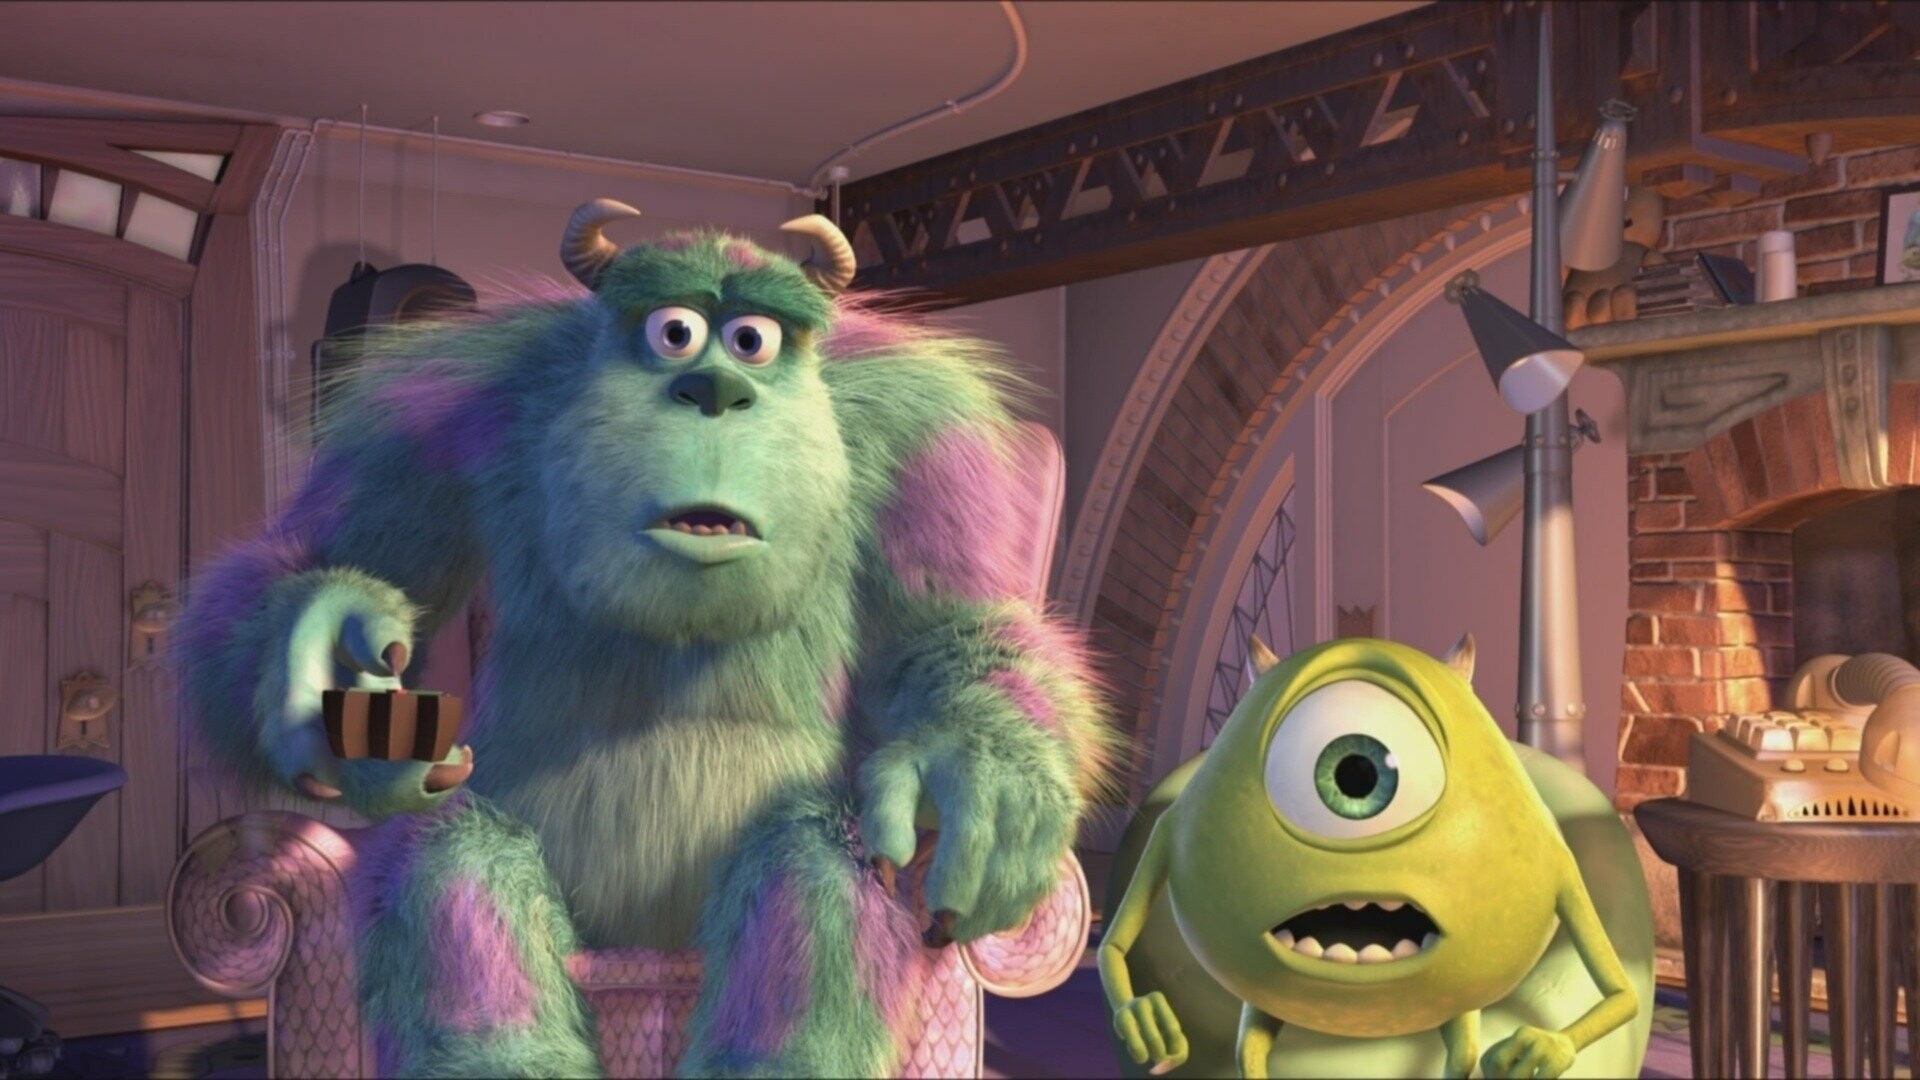 Monsters, Inc.: Sulley and Mike Wazowski, The top scare team. 1920x1080 Full HD Background.